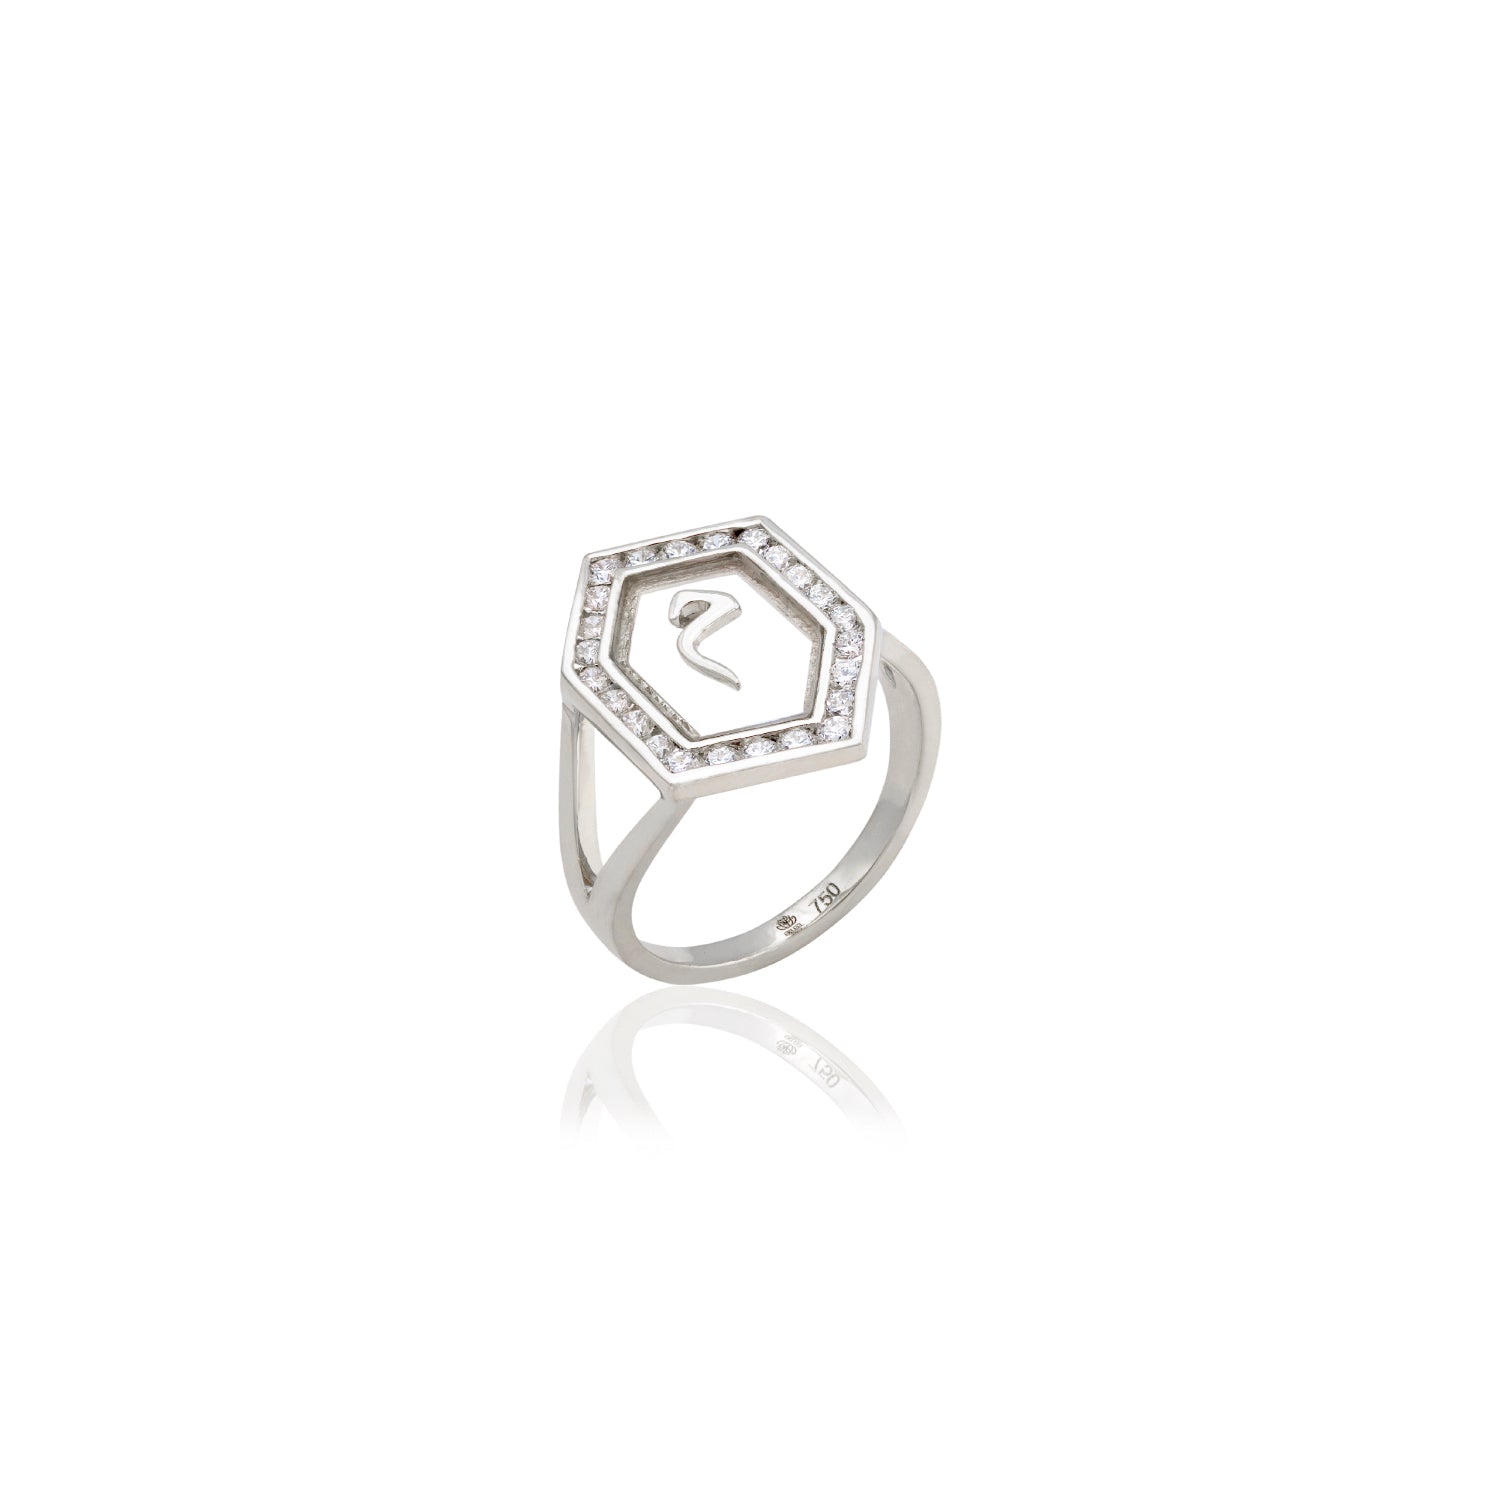 Qamoos 1.0 Letter م Diamond Ring in White Gold